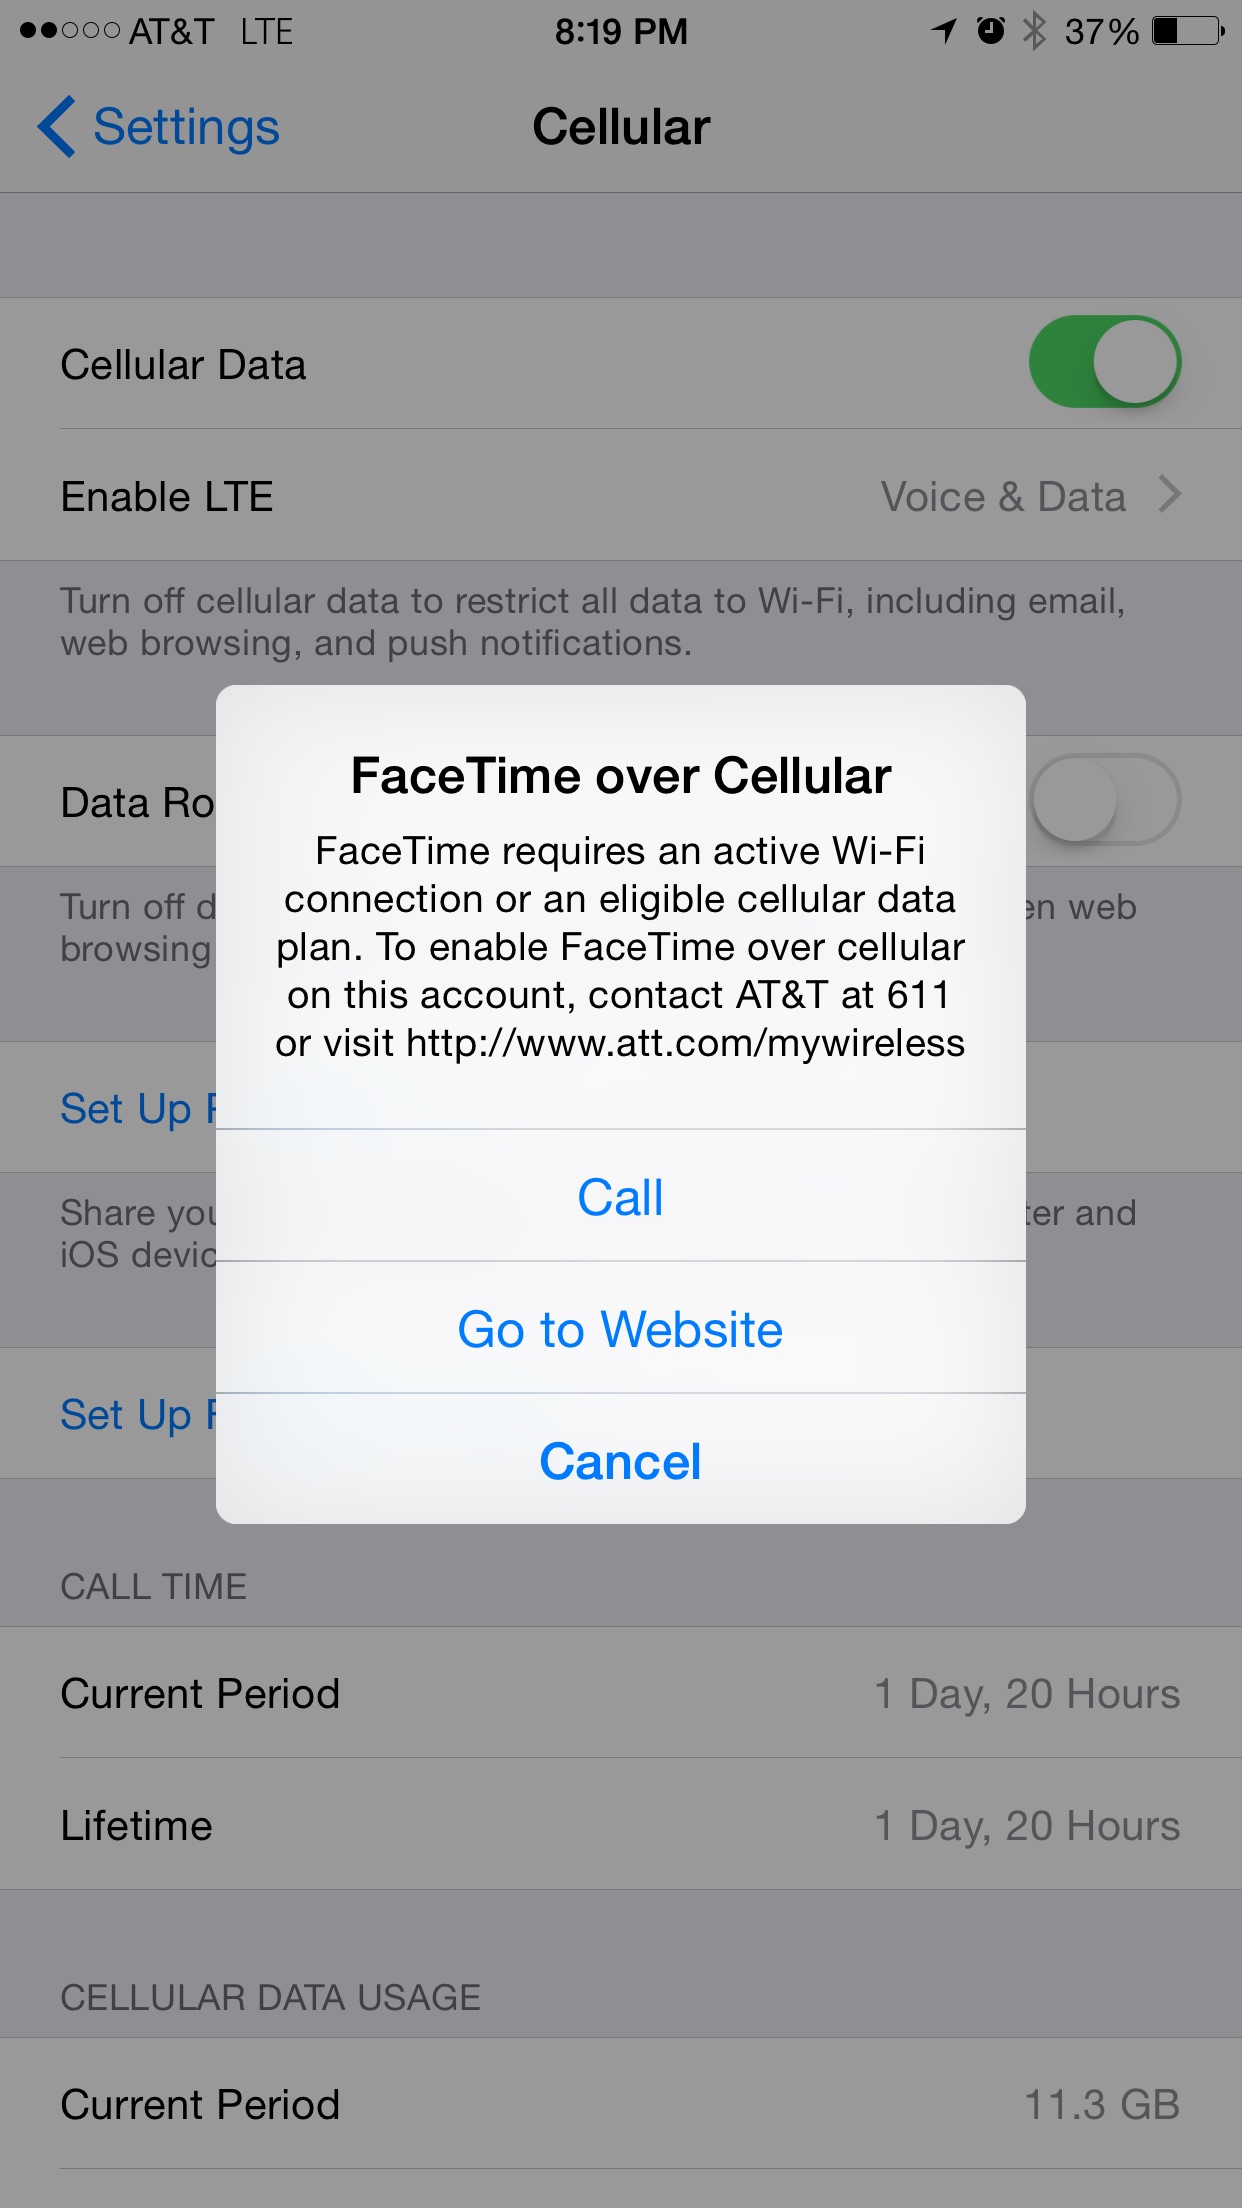 Does FaceTime use data or minutes? Is FaceTime free?